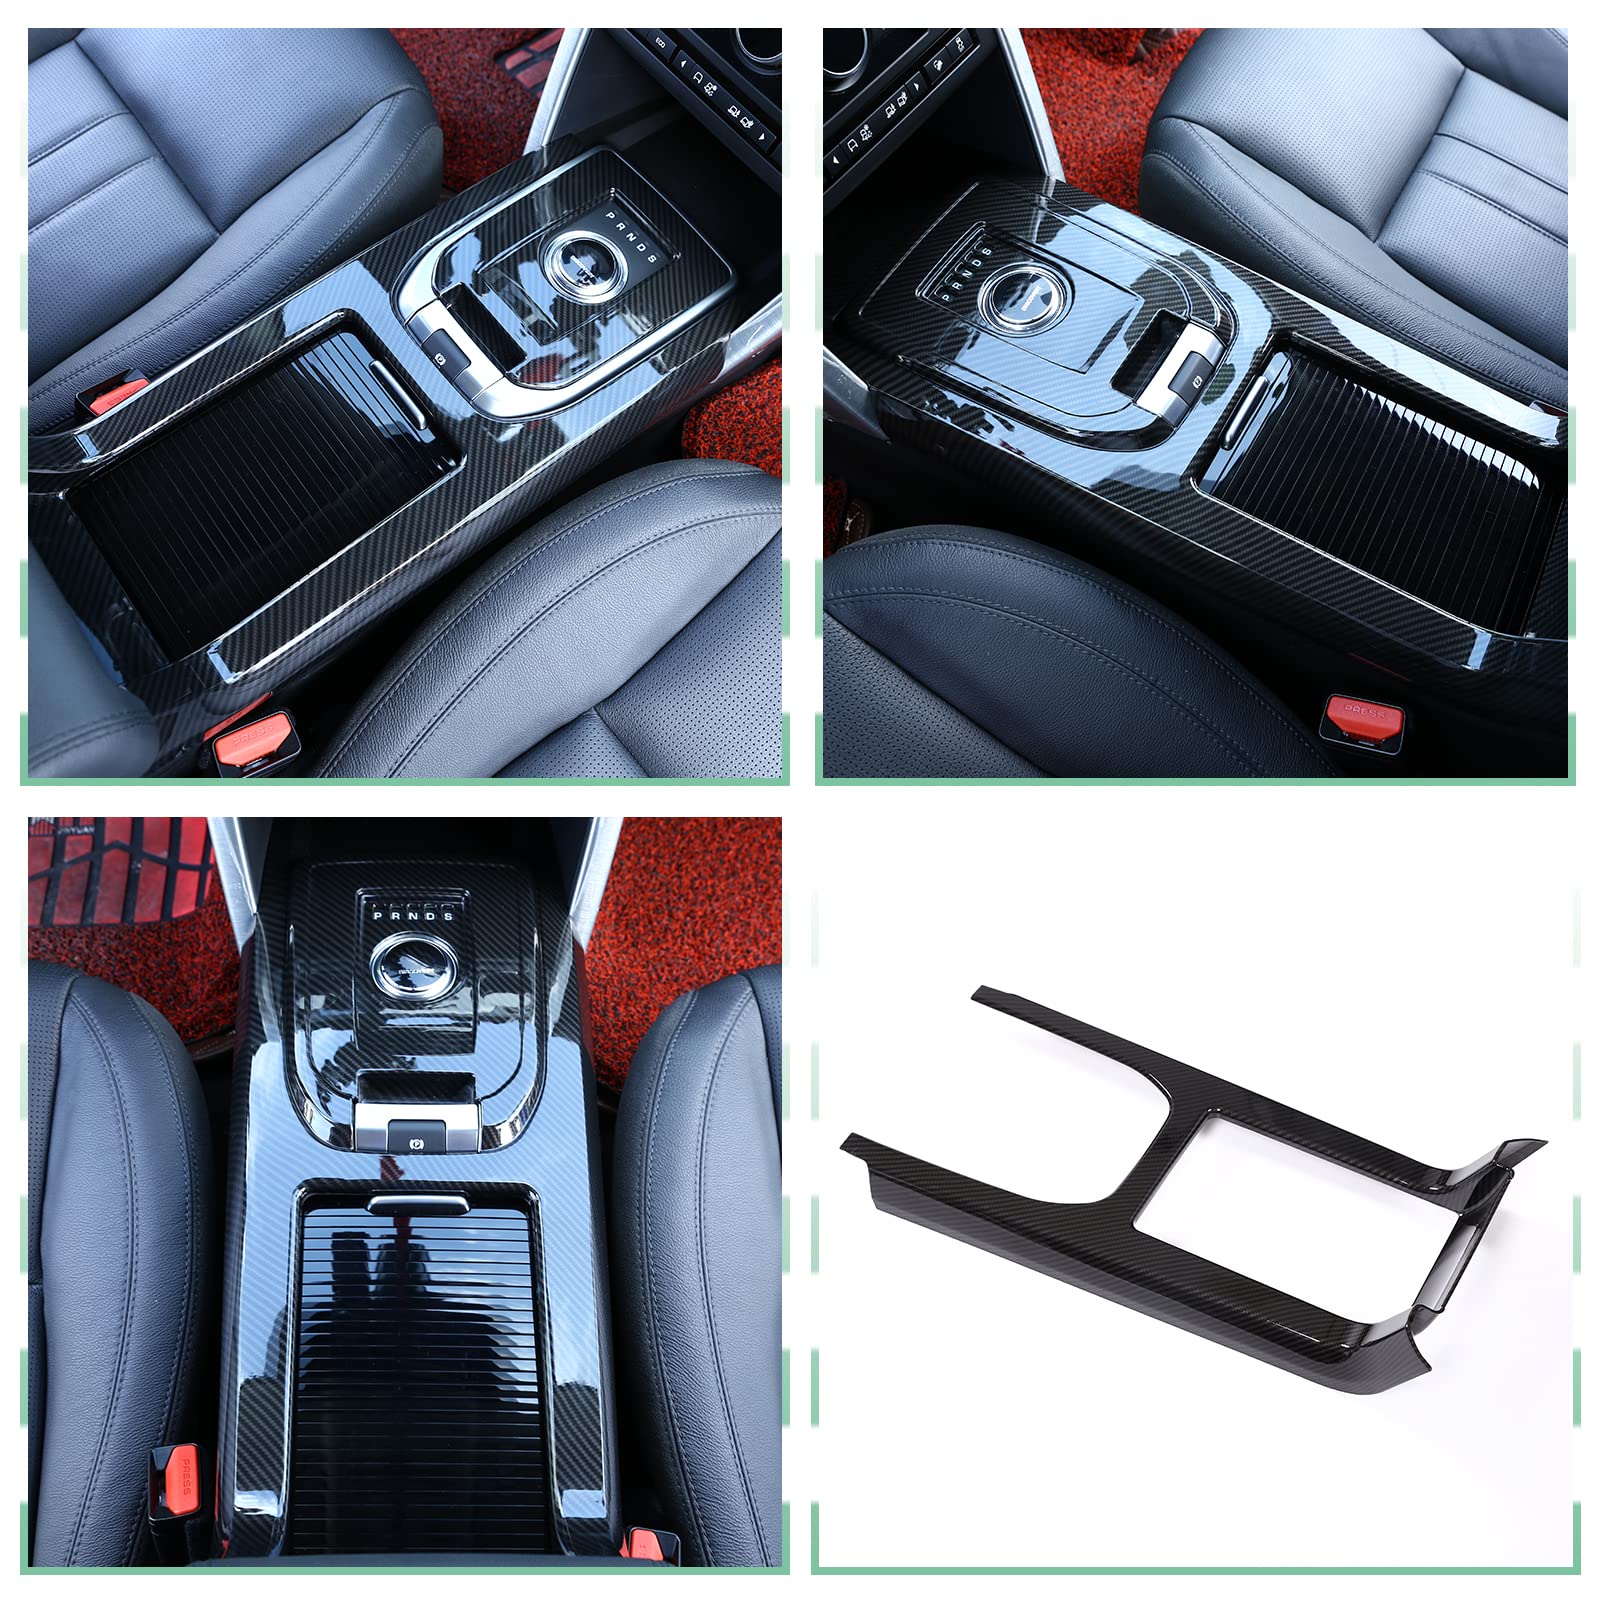 LLKUANG Carbon Fiber Style ABS Inner Center Console Gear Shift Frame Trim for Land Rover Discovery Sport 2015-2019